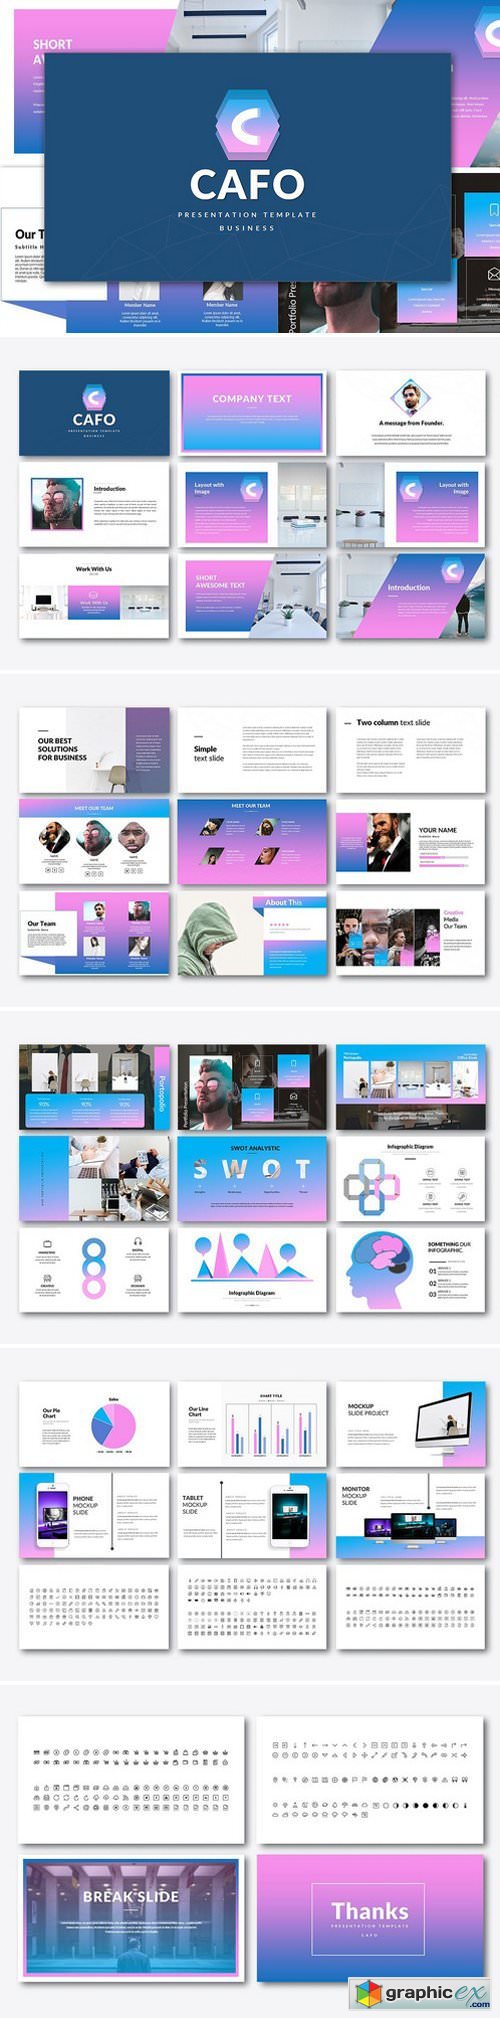 Cafo Business Powerpoint Template